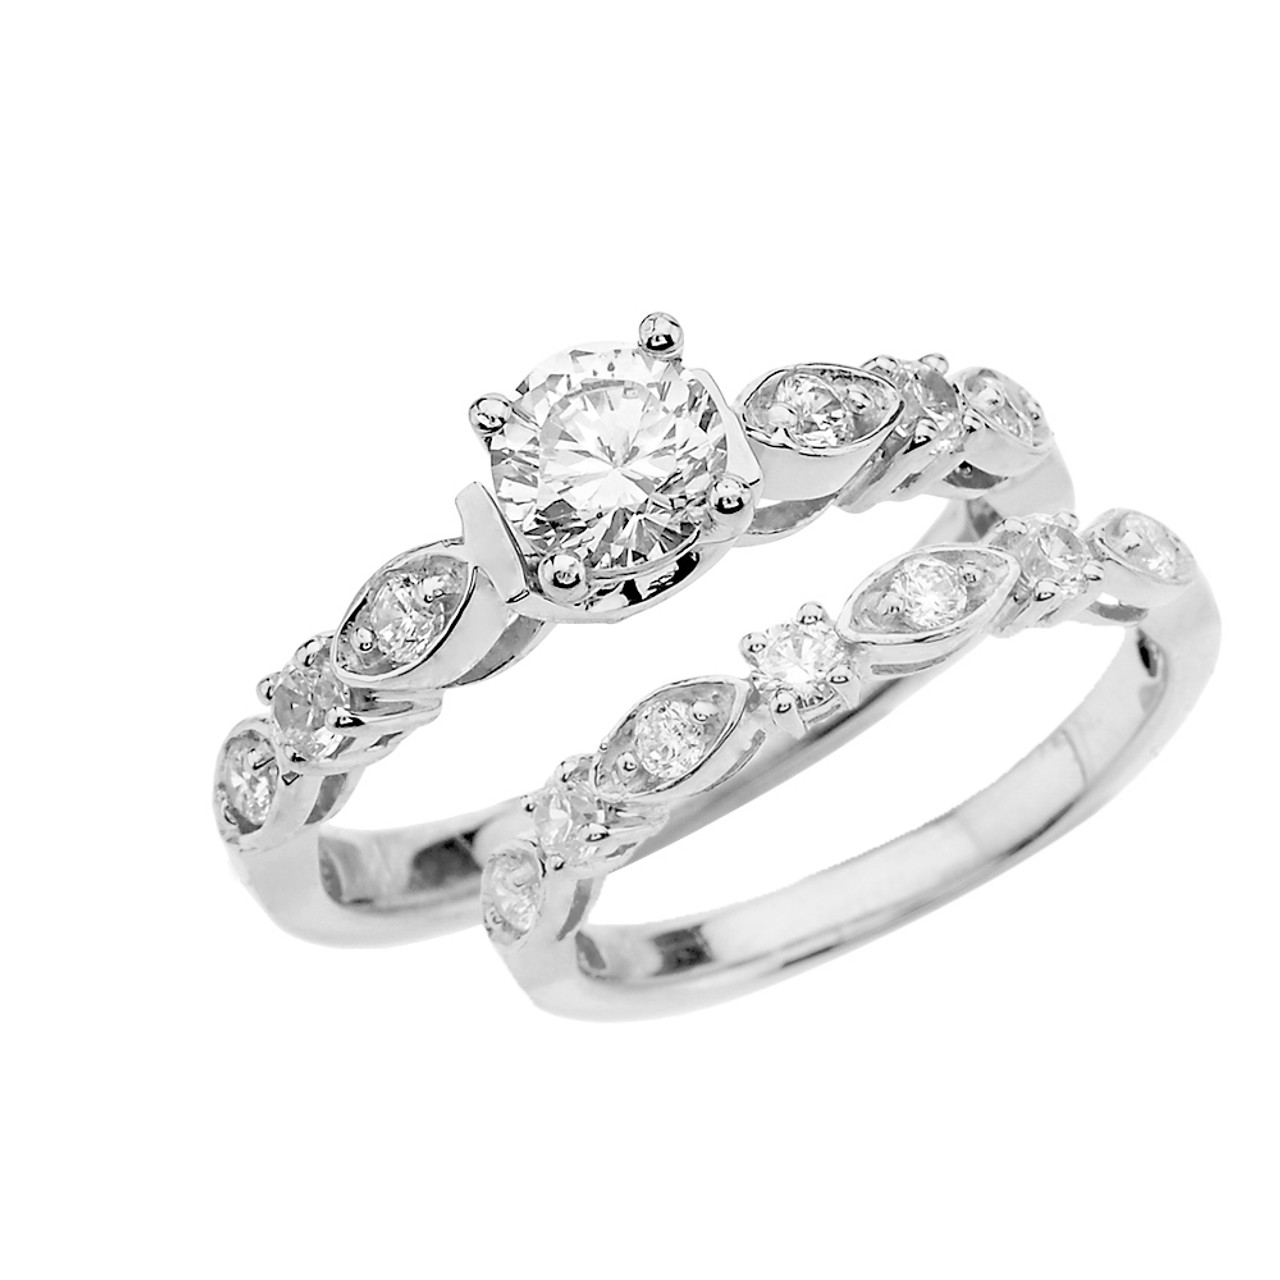 White Gold Wedding Ring Set With Cubic Zirconia